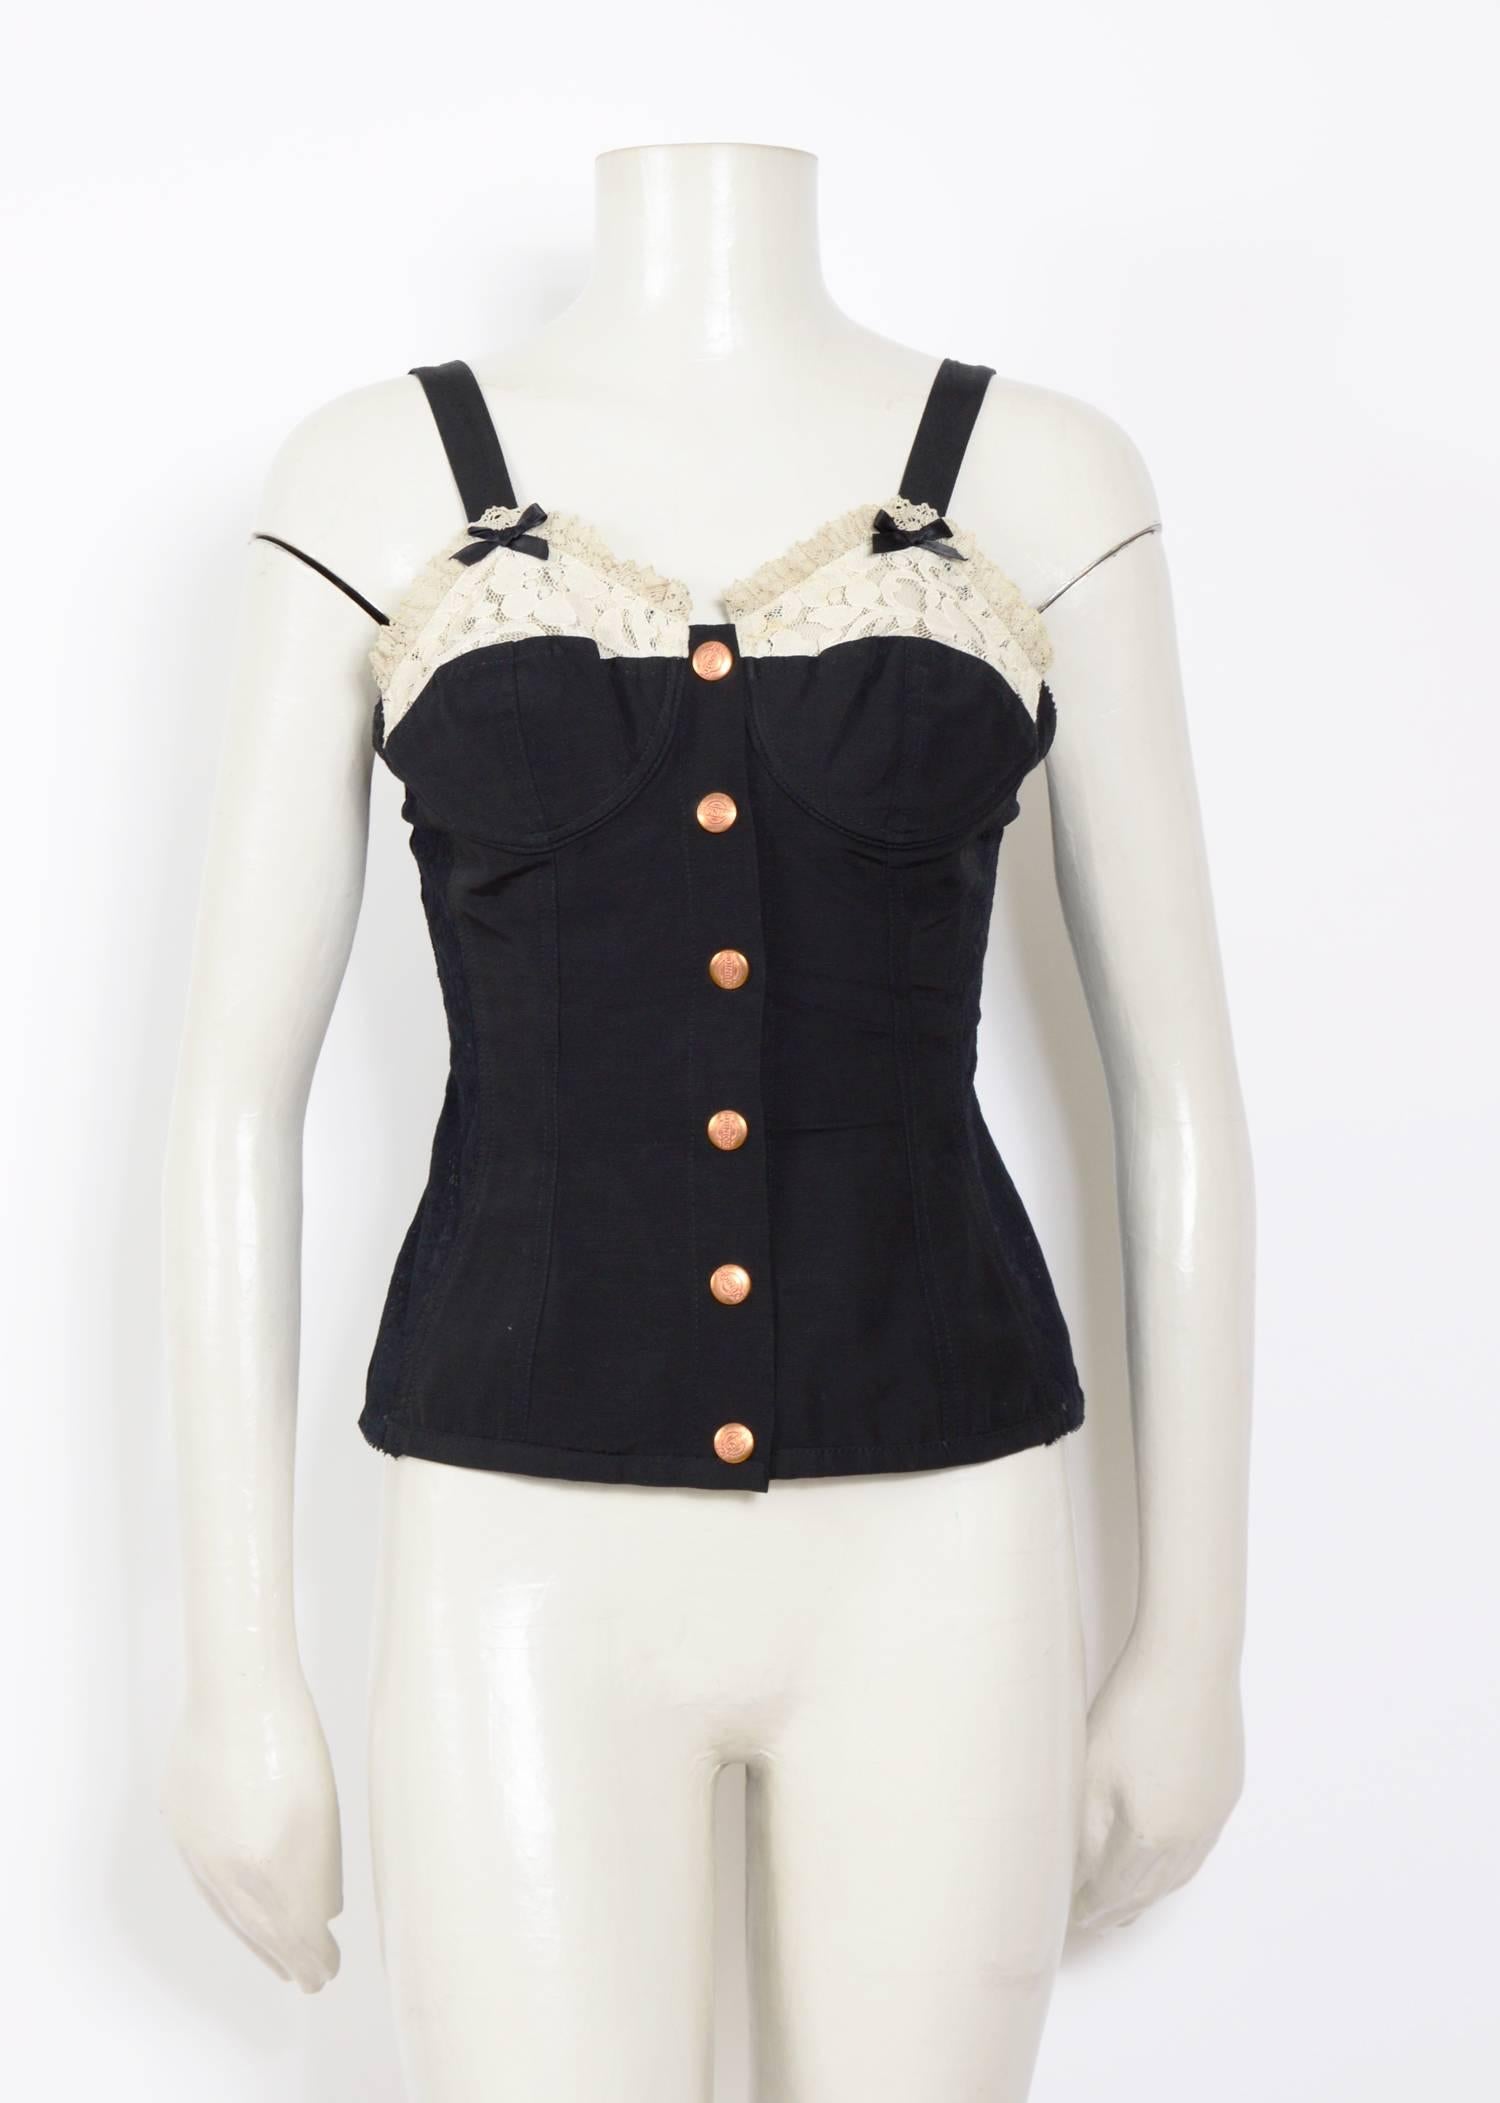 Jean Paul Gaultier black corset top.
60% cotton and 40% rayon.
Lace elasticized panels allowing side stretch, front button closure.
There is no Size Label, please use the measurements that are taken flat?
Ua to Ua 16,5inch/42cm(x2) - Waist